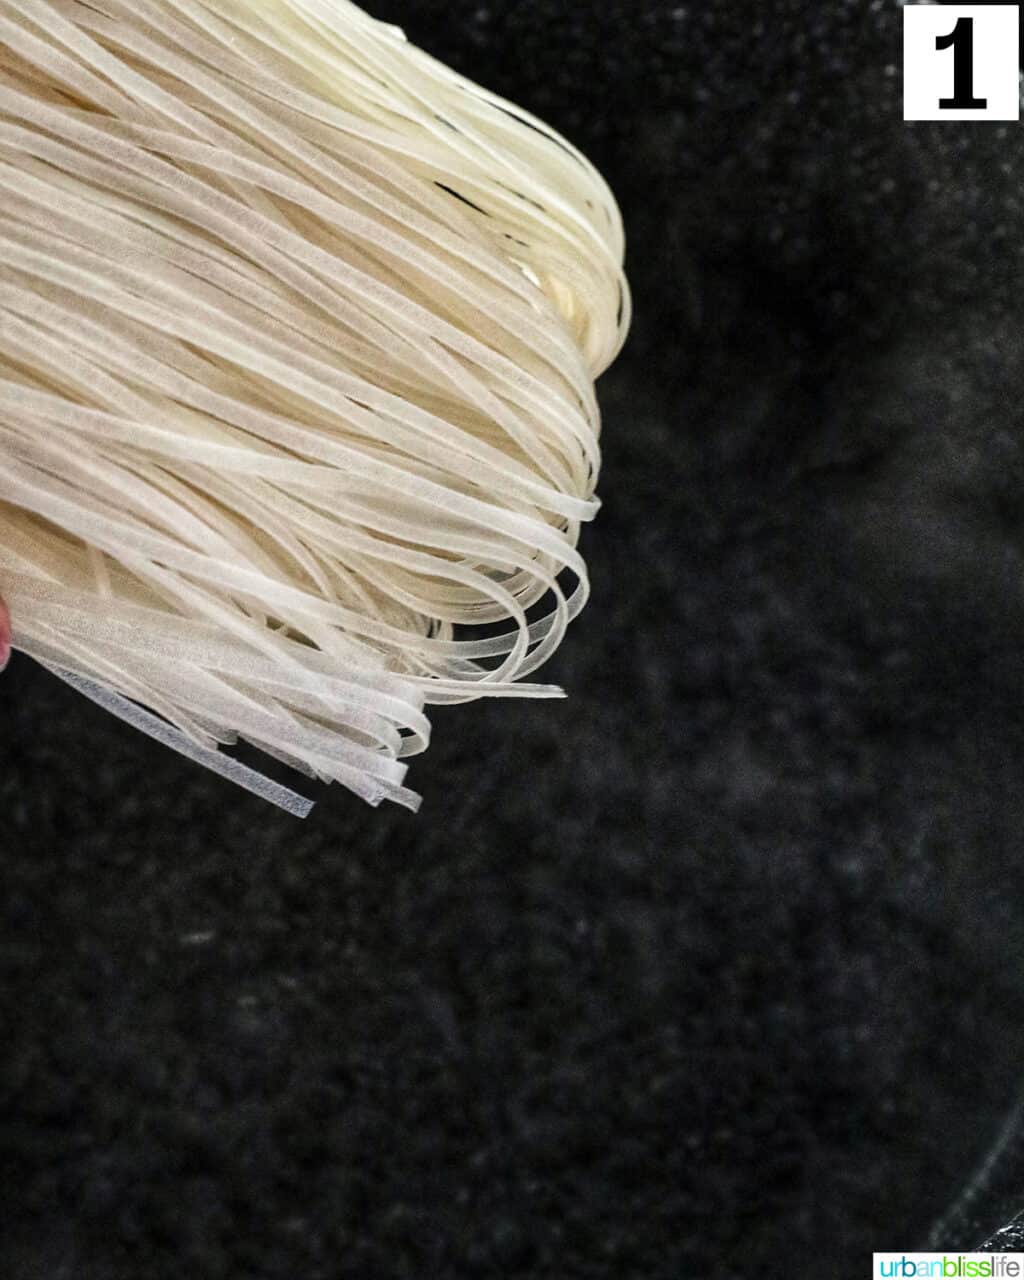 lowering rice noodles into a large pot with water.